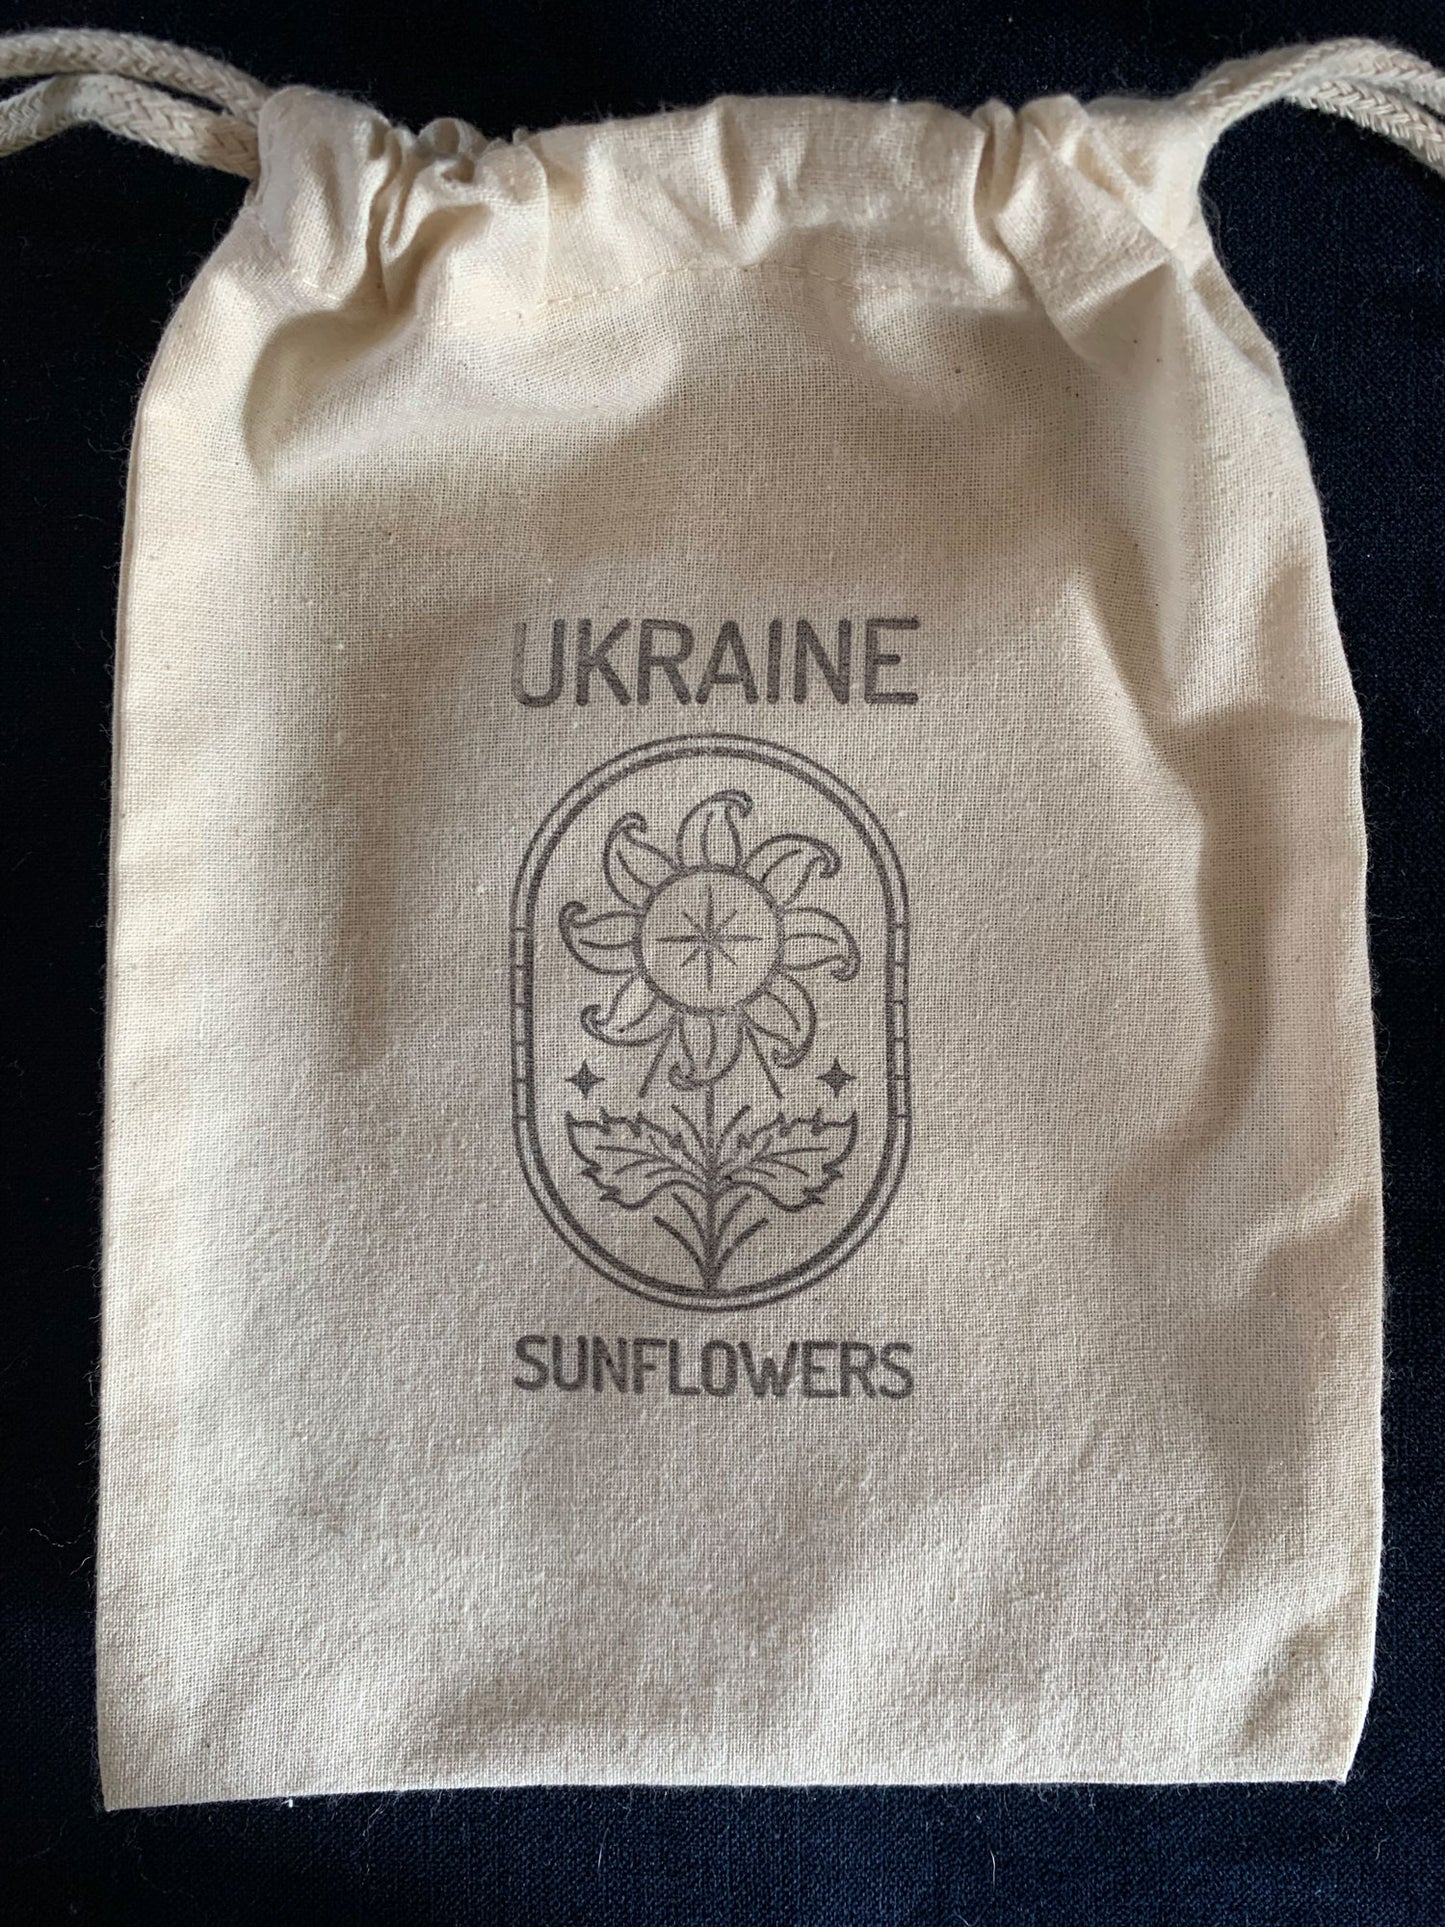 Sunflower seed paper and reusable produce bag for Ukraine